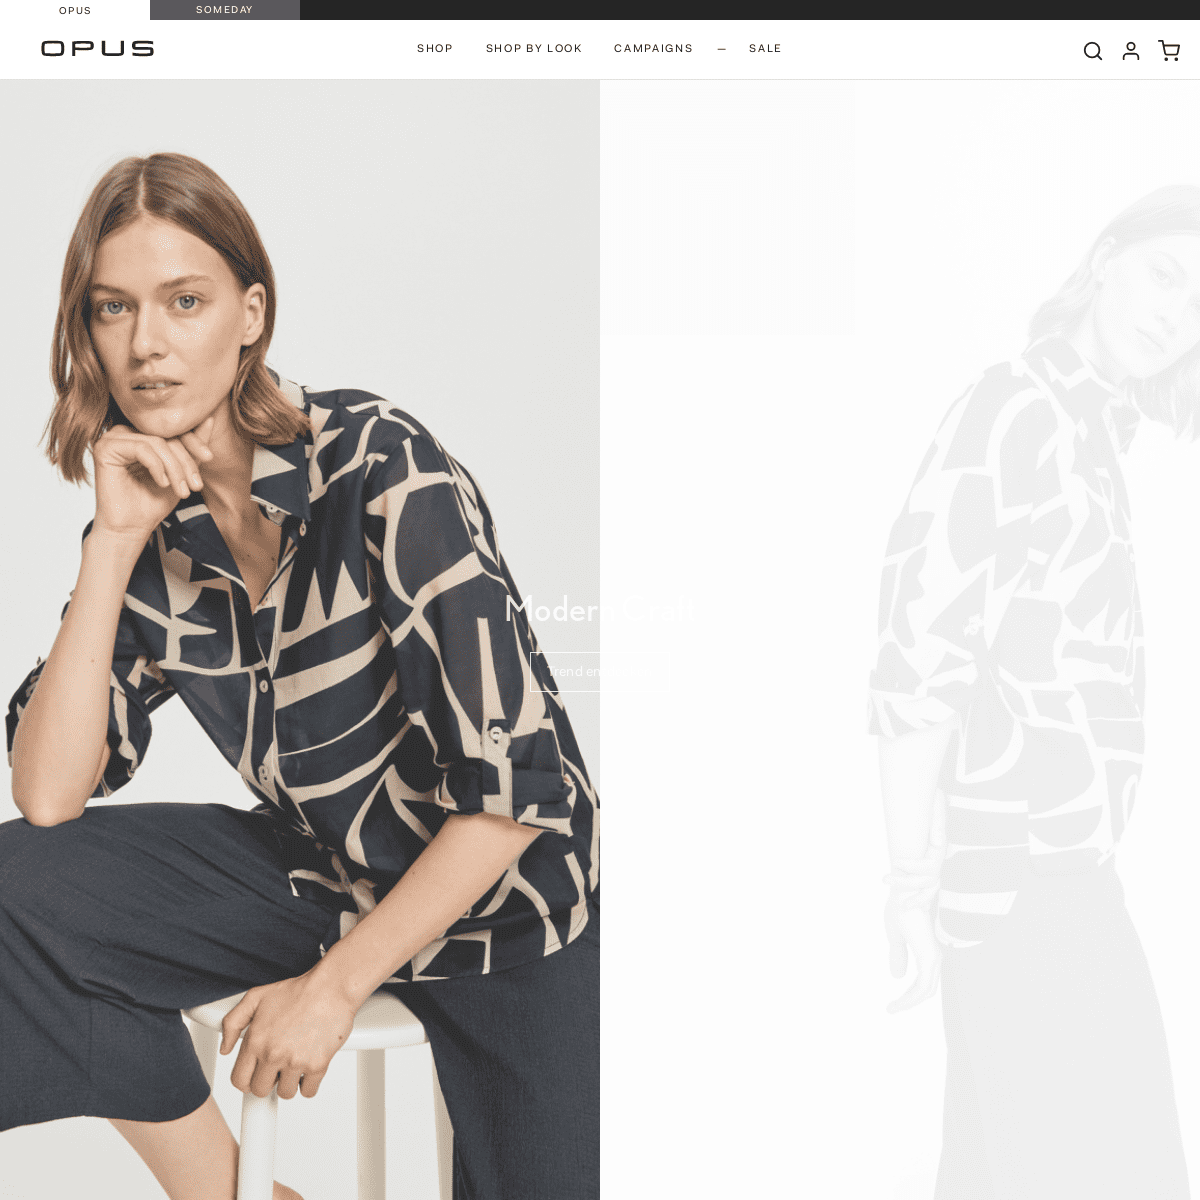 A complete backup of https://casual-fashion.com